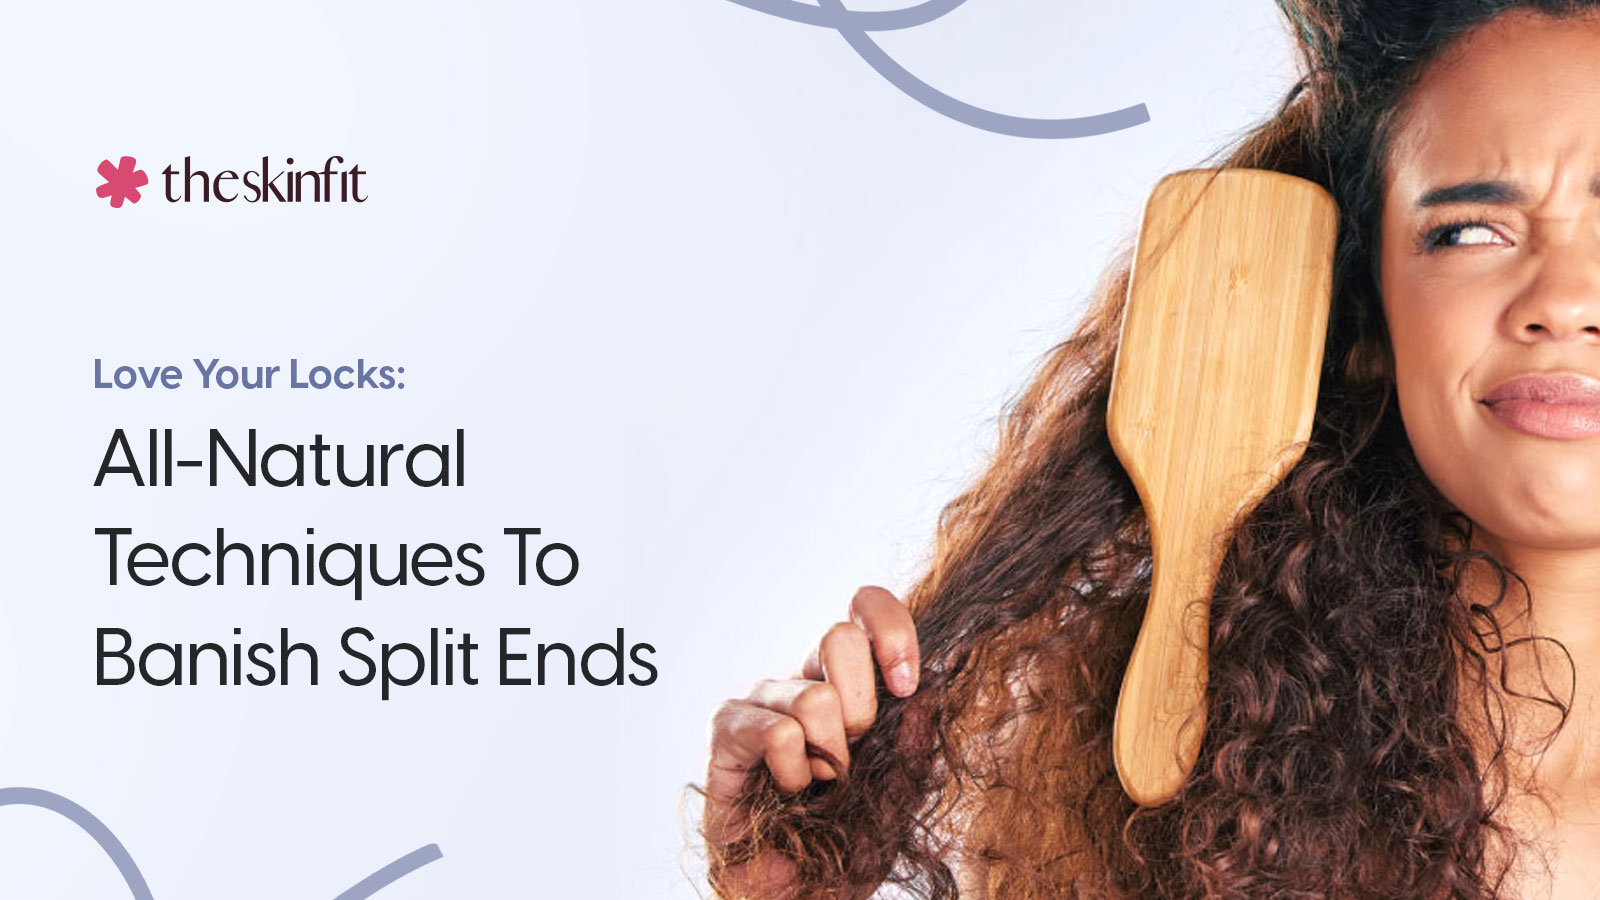 Love Your Locks: All-Natural Techniques To Banish Split Ends